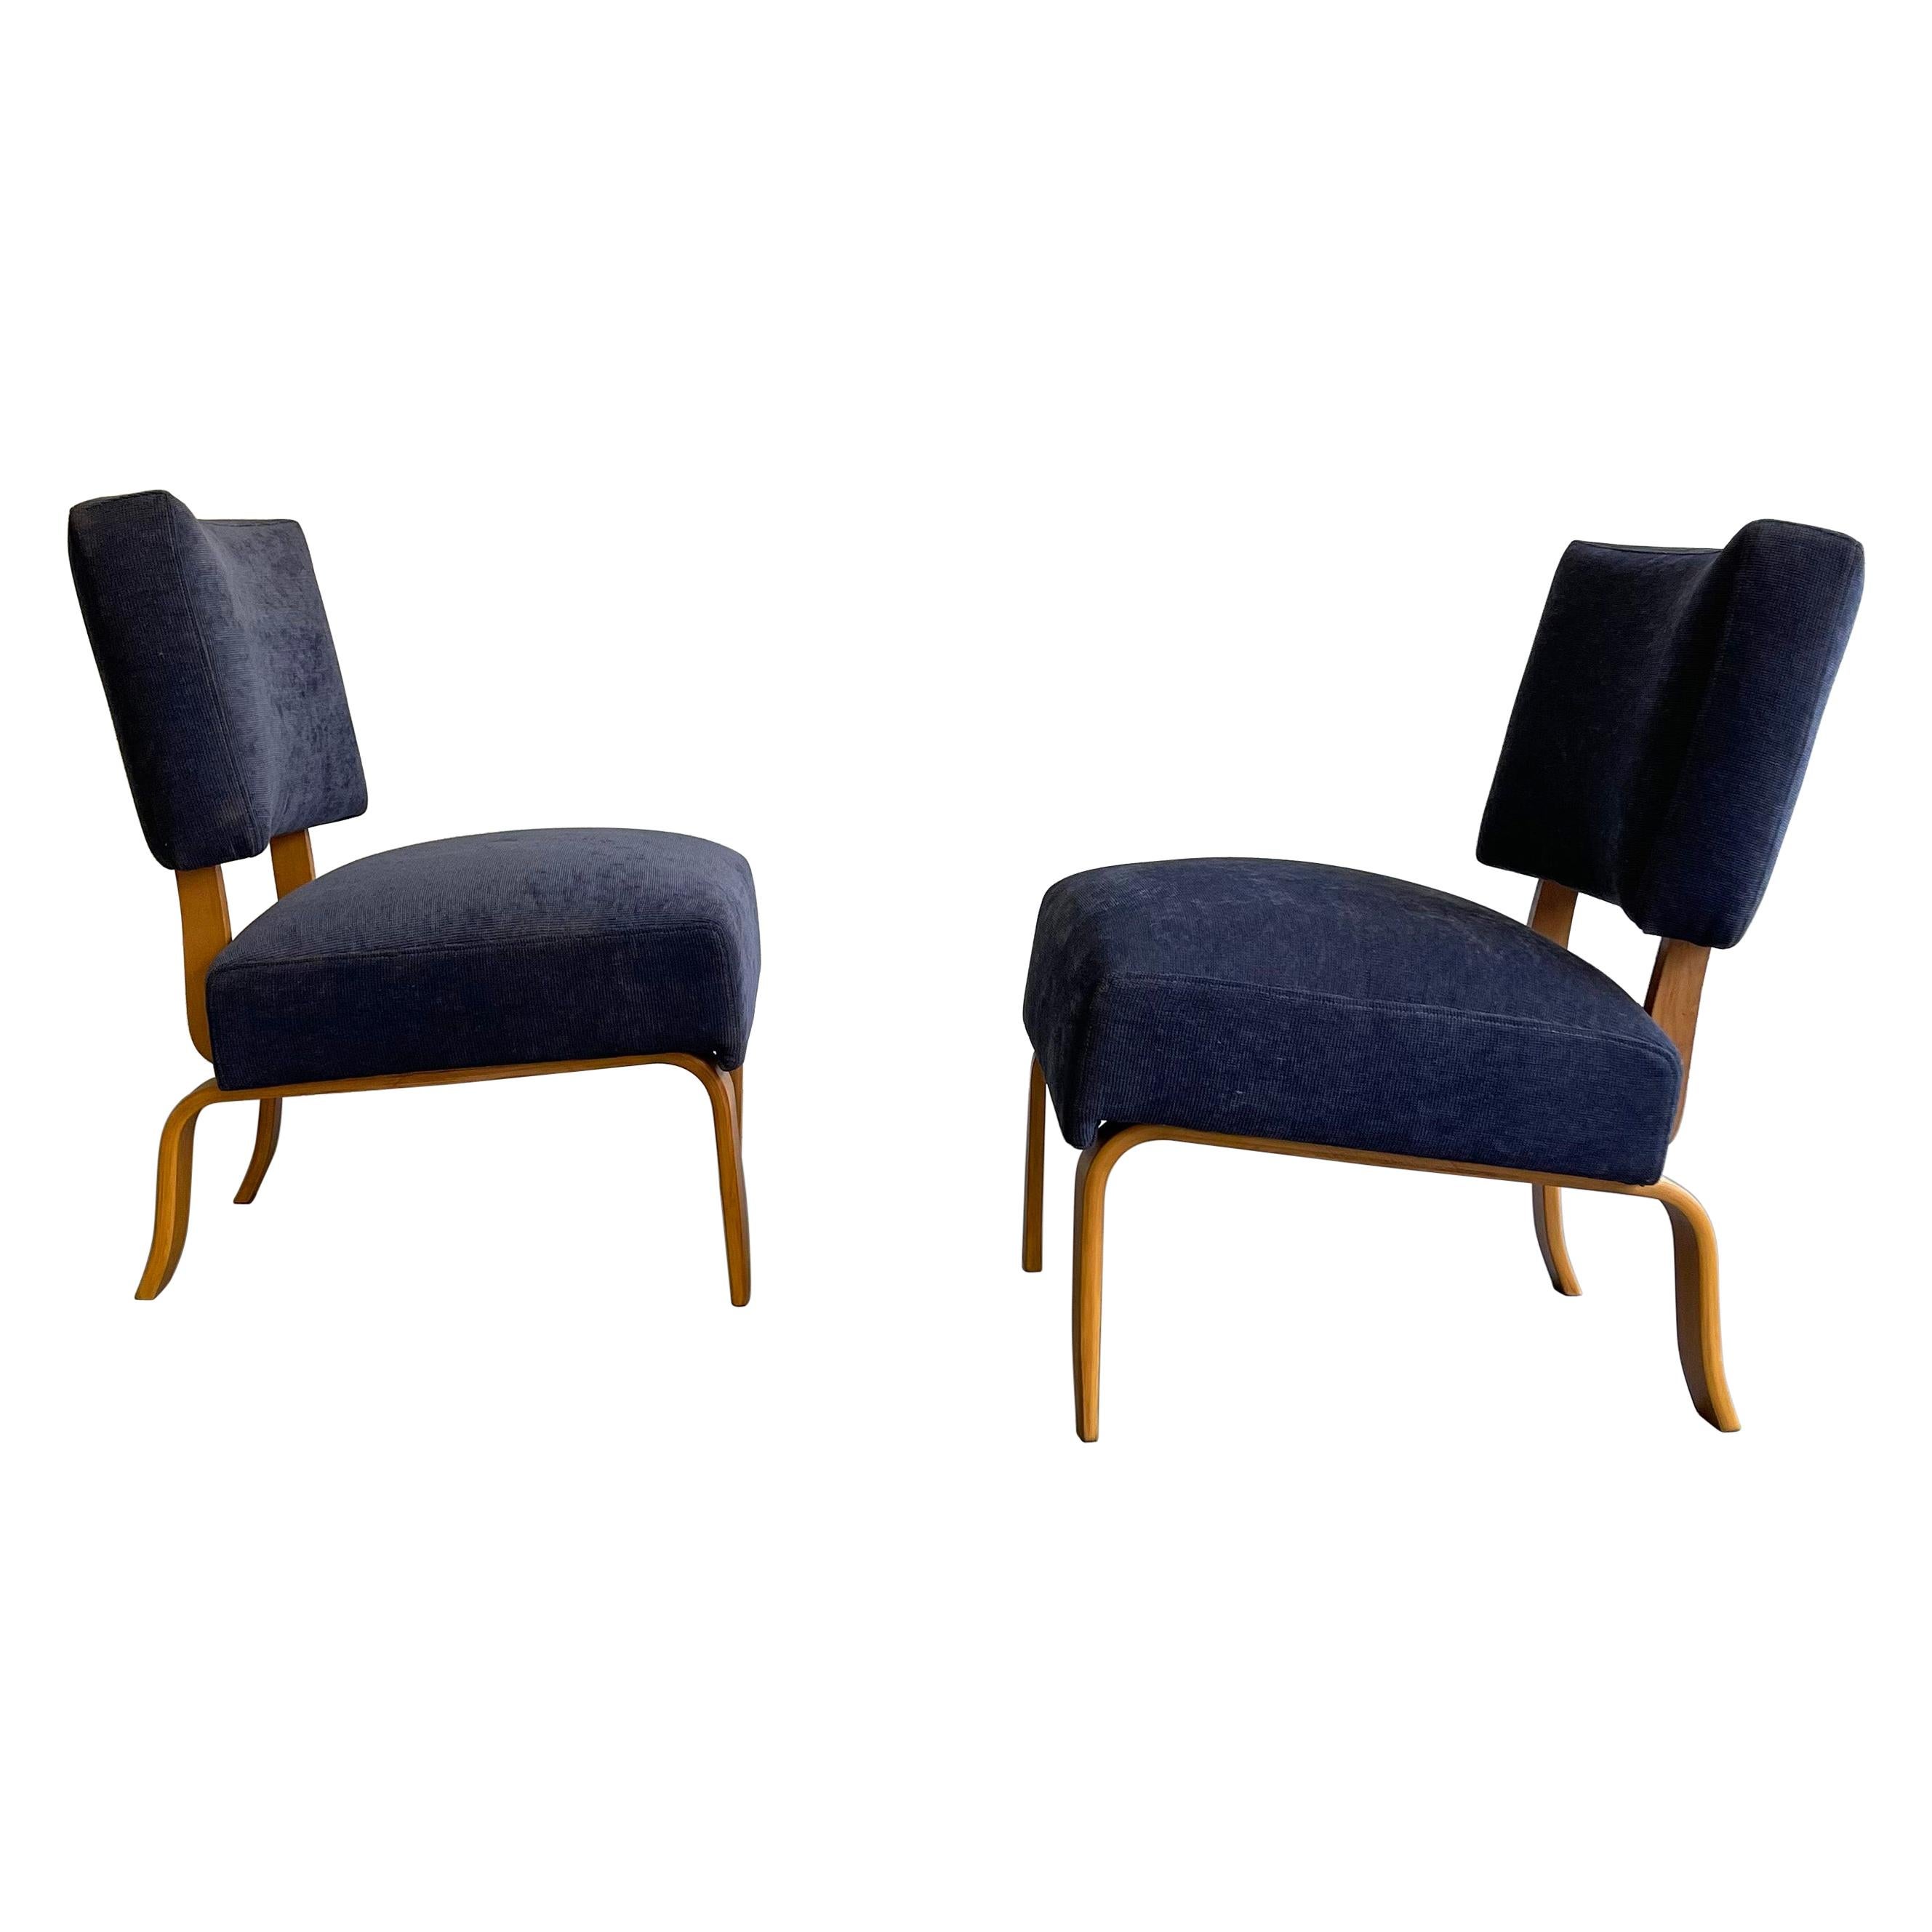 Pair of Bent Maple Upholstered Slipper Lounge Chairs by Thonet